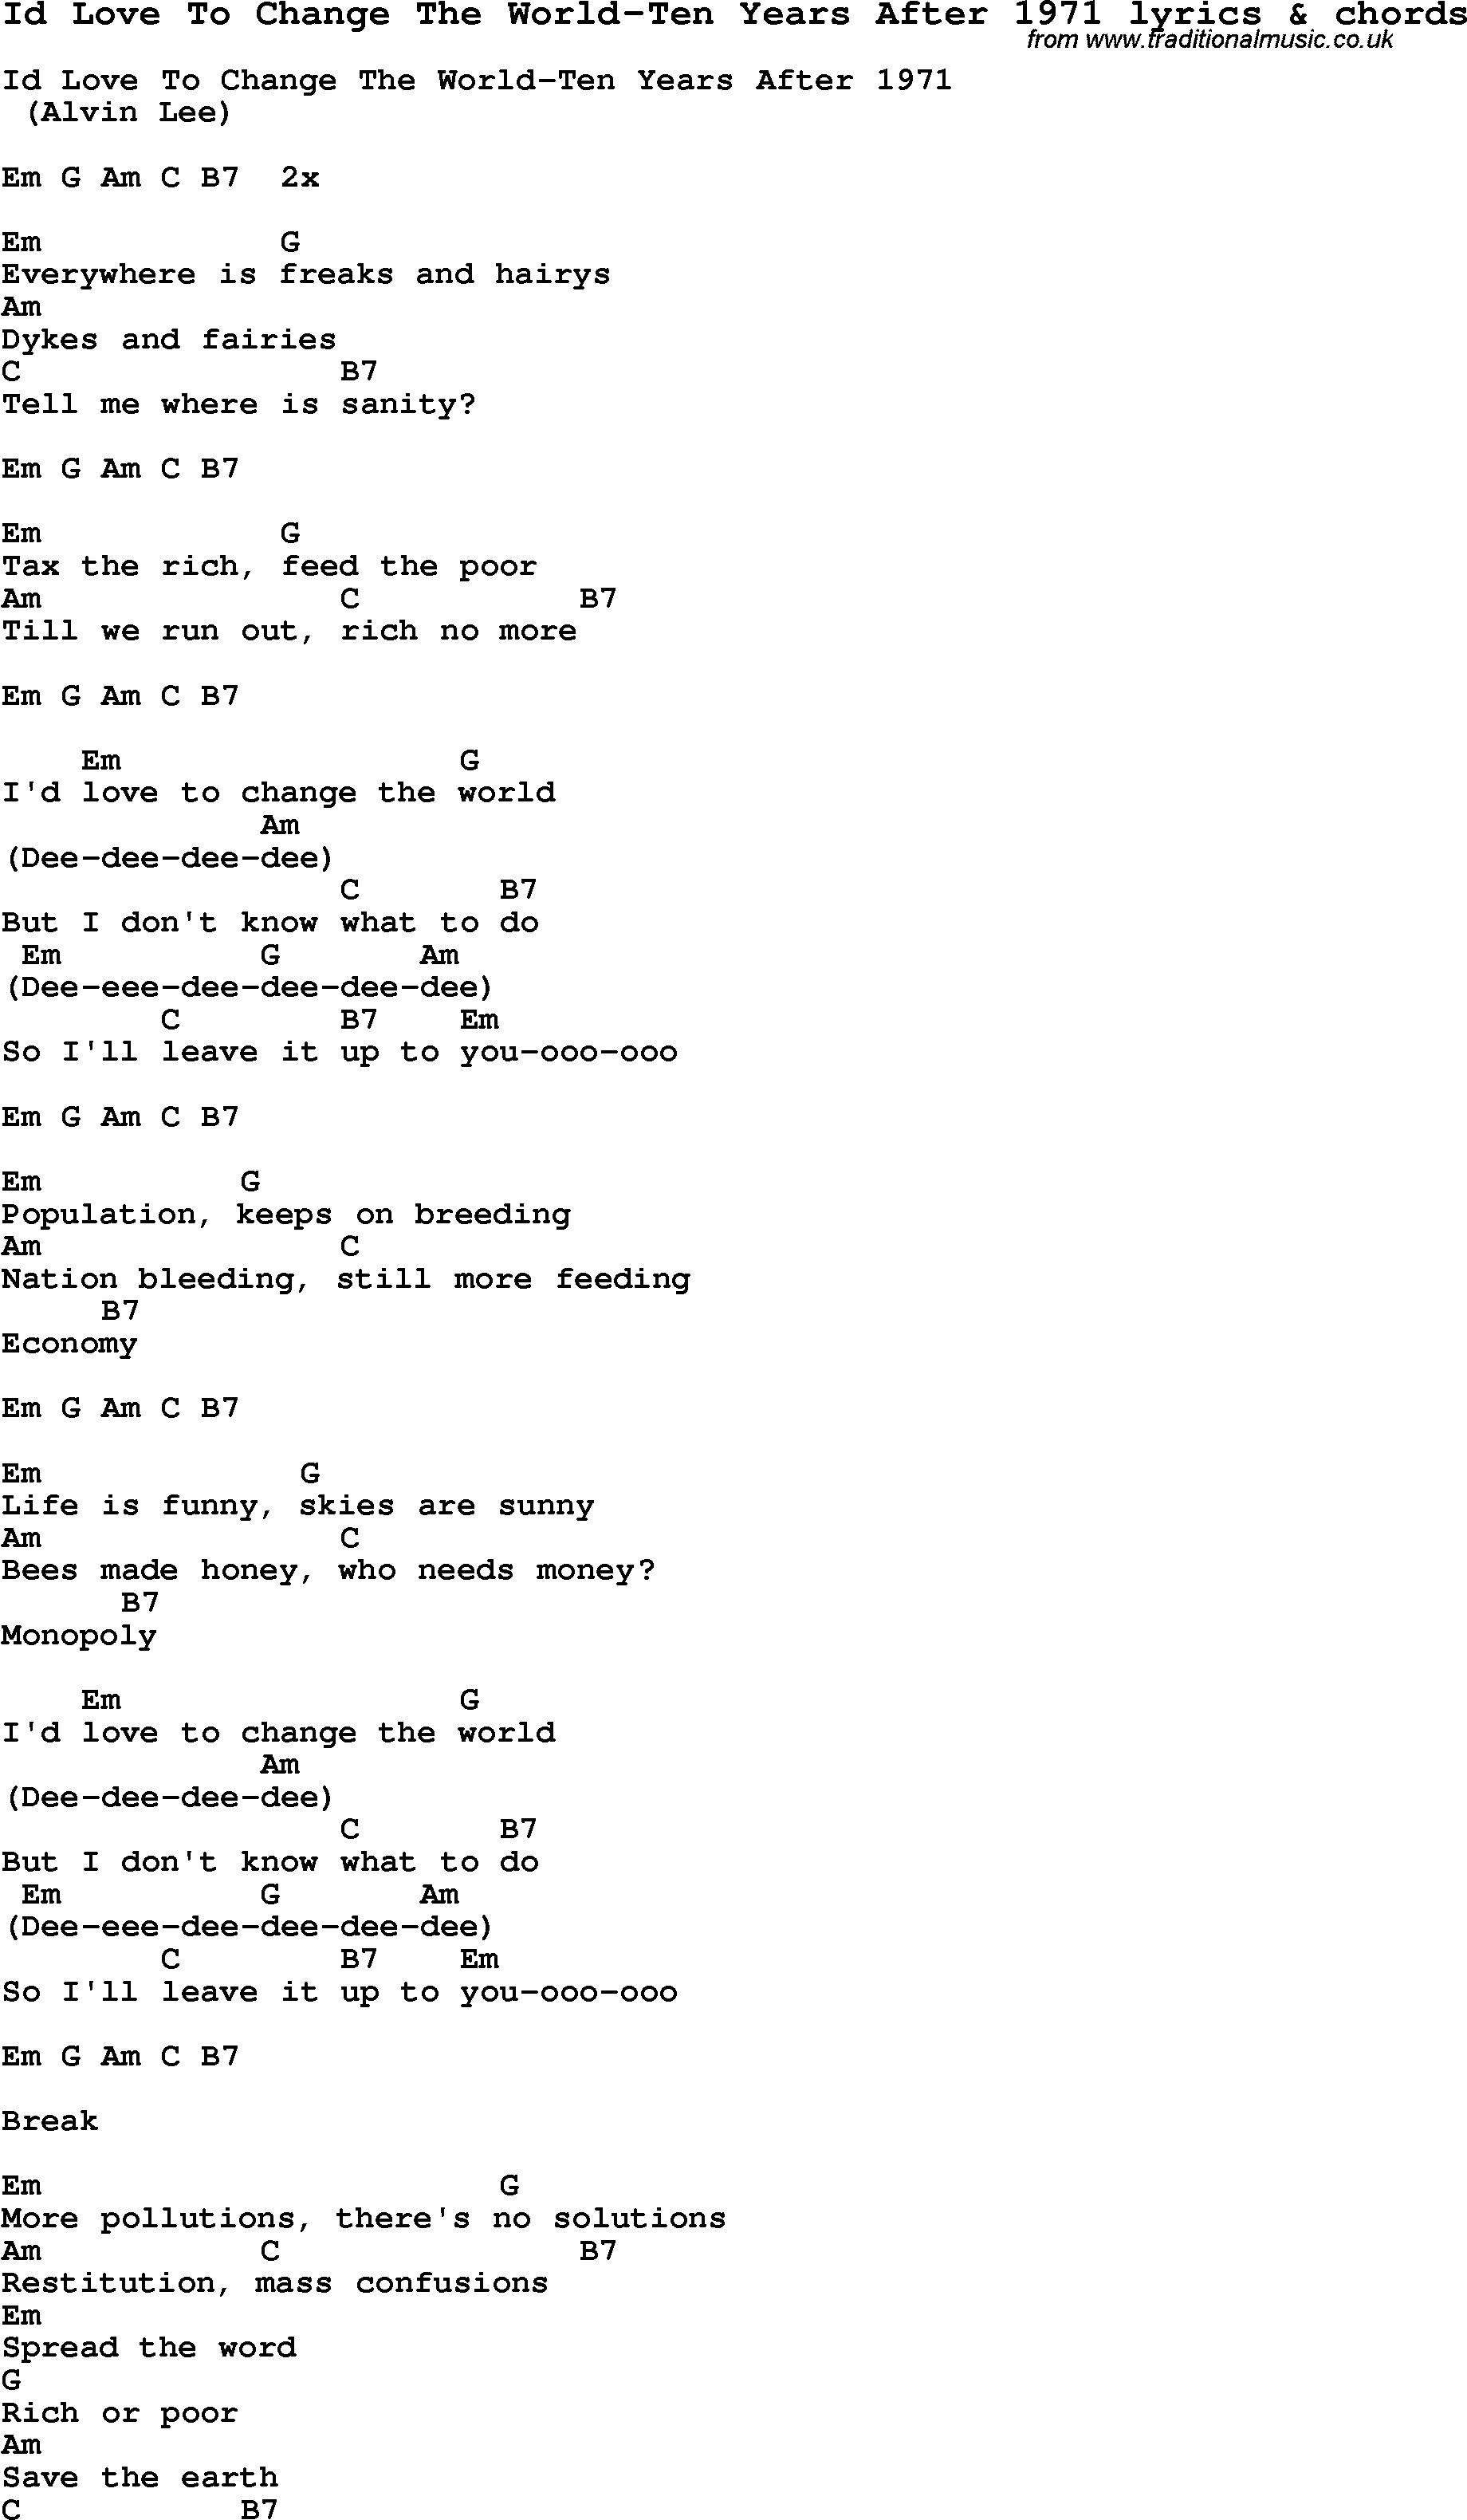 Love Song Lyrics For Id Love To Change The World Ten Years After